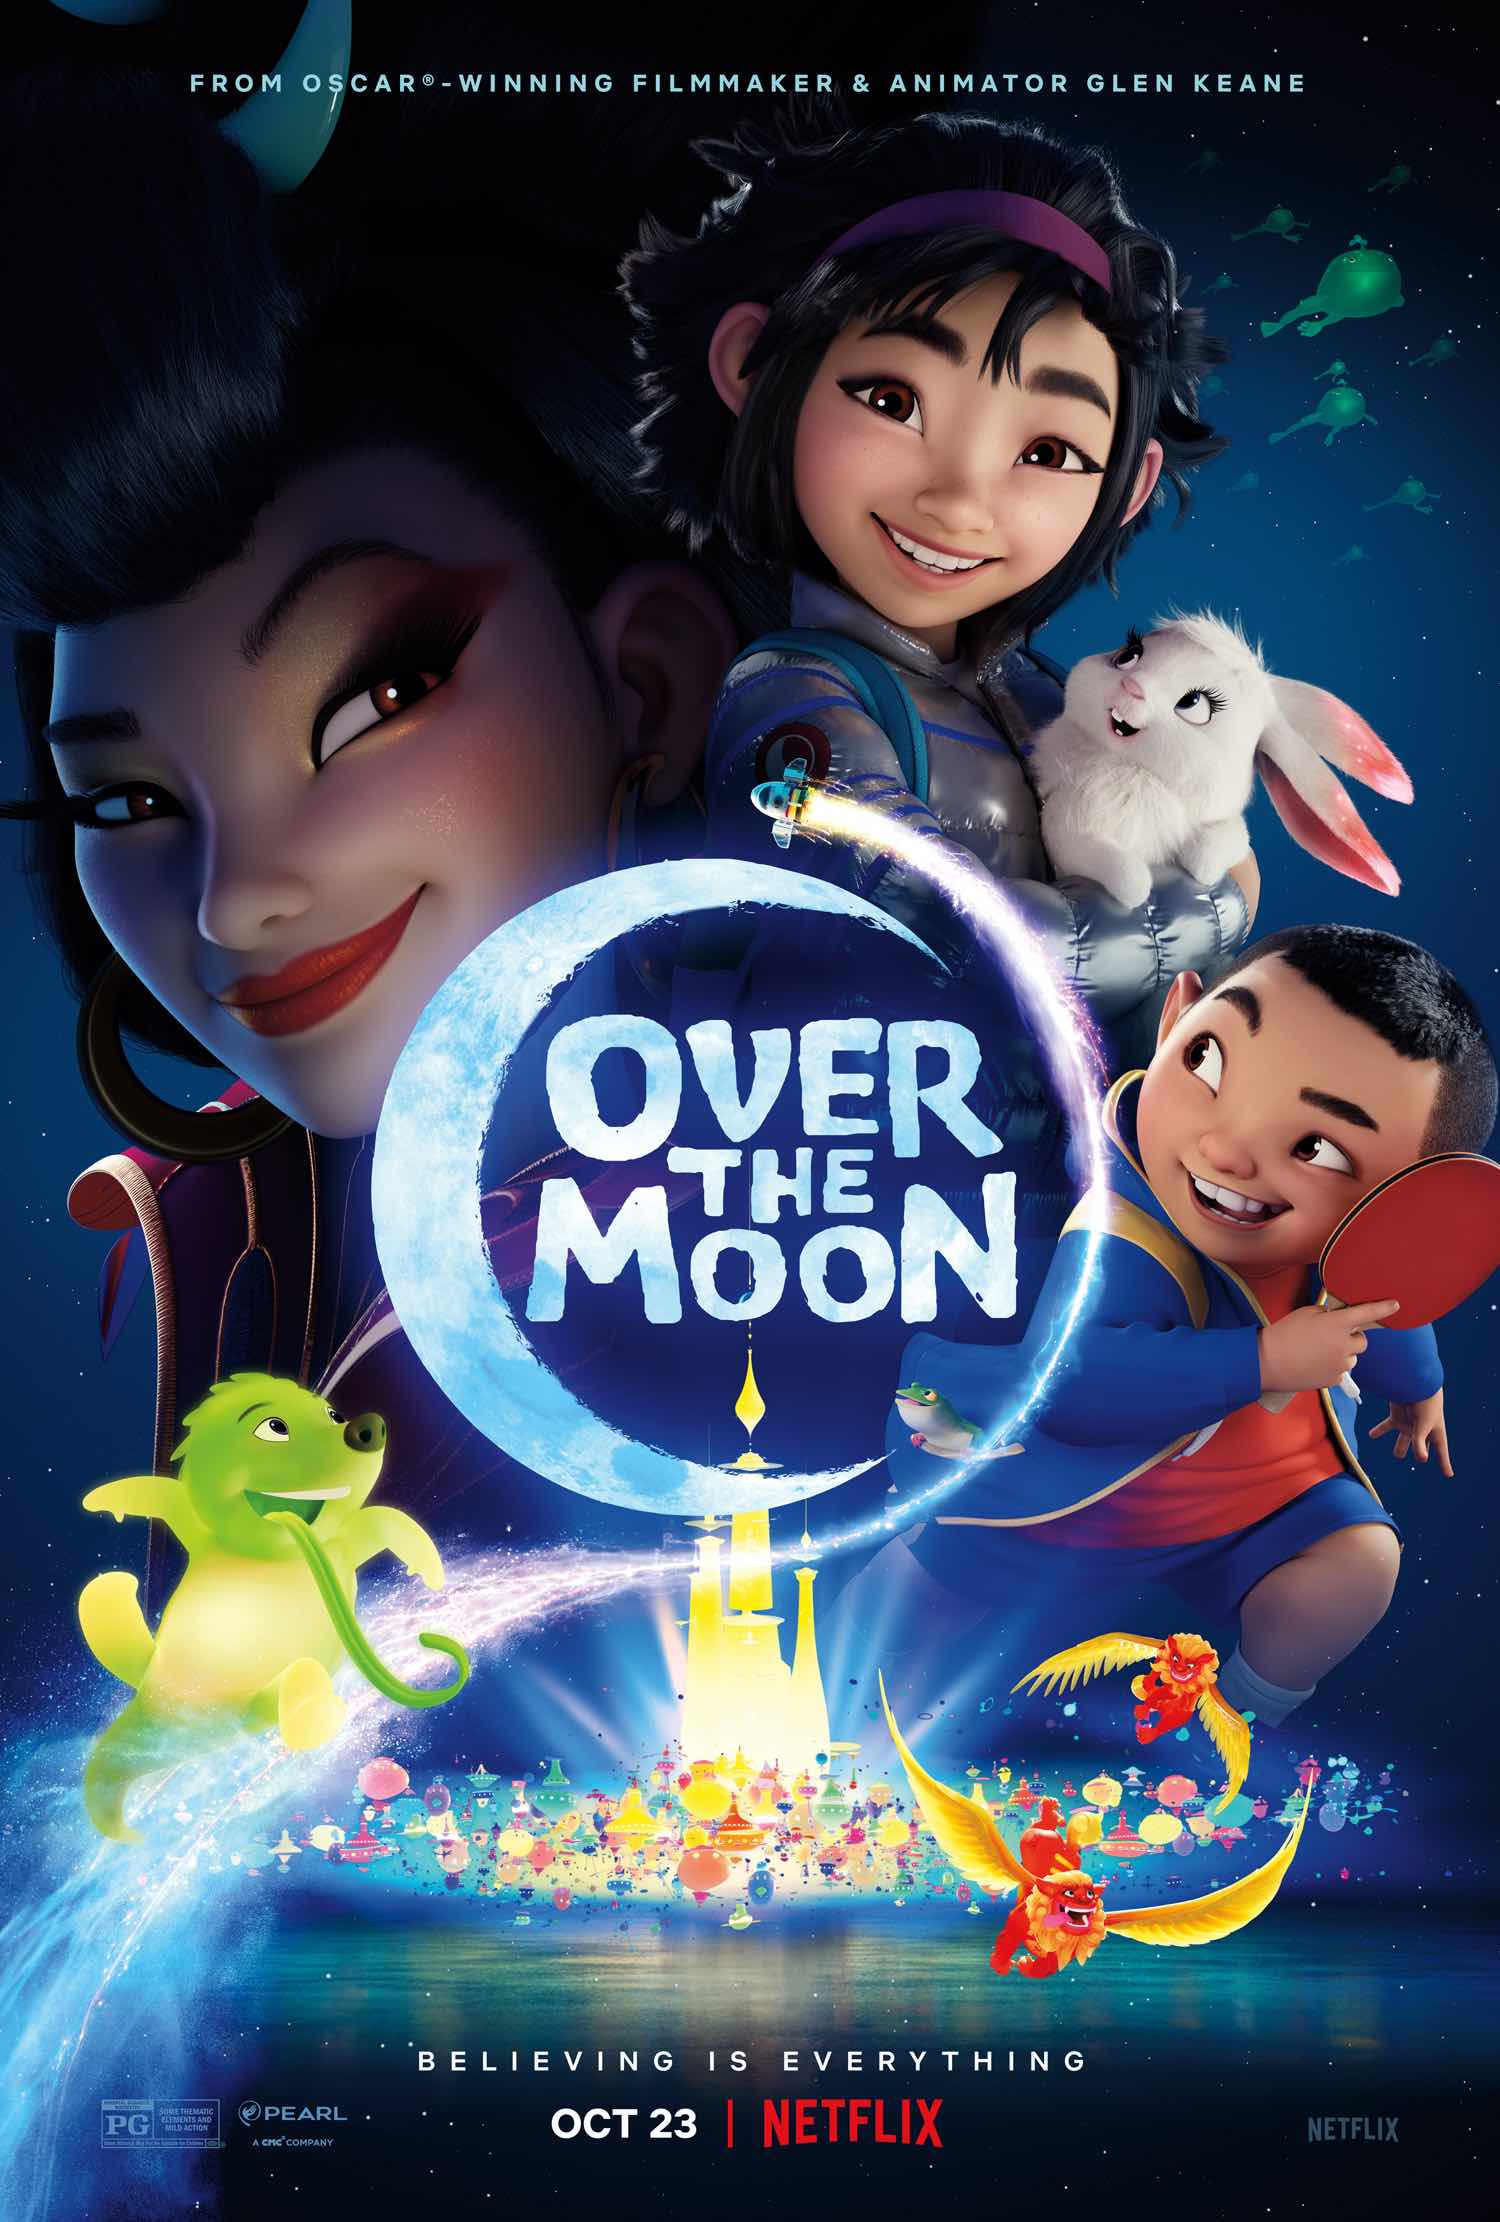 "Over the Moon" poster